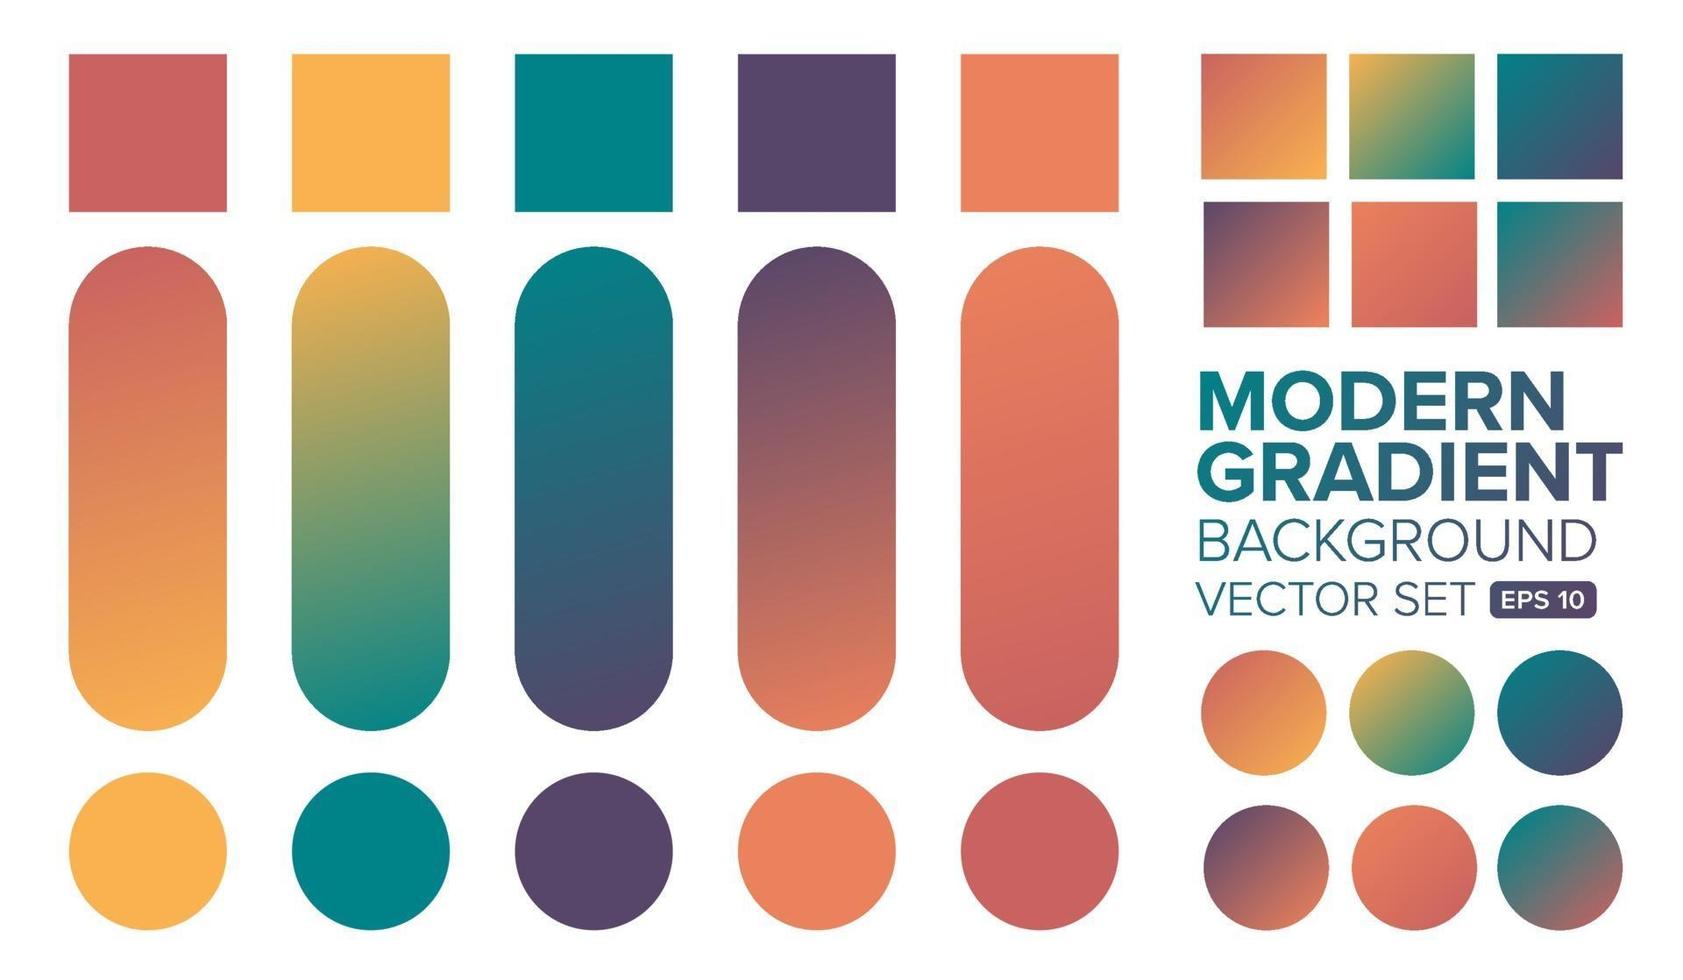 Set of colorful modern gradient backgrounds vector